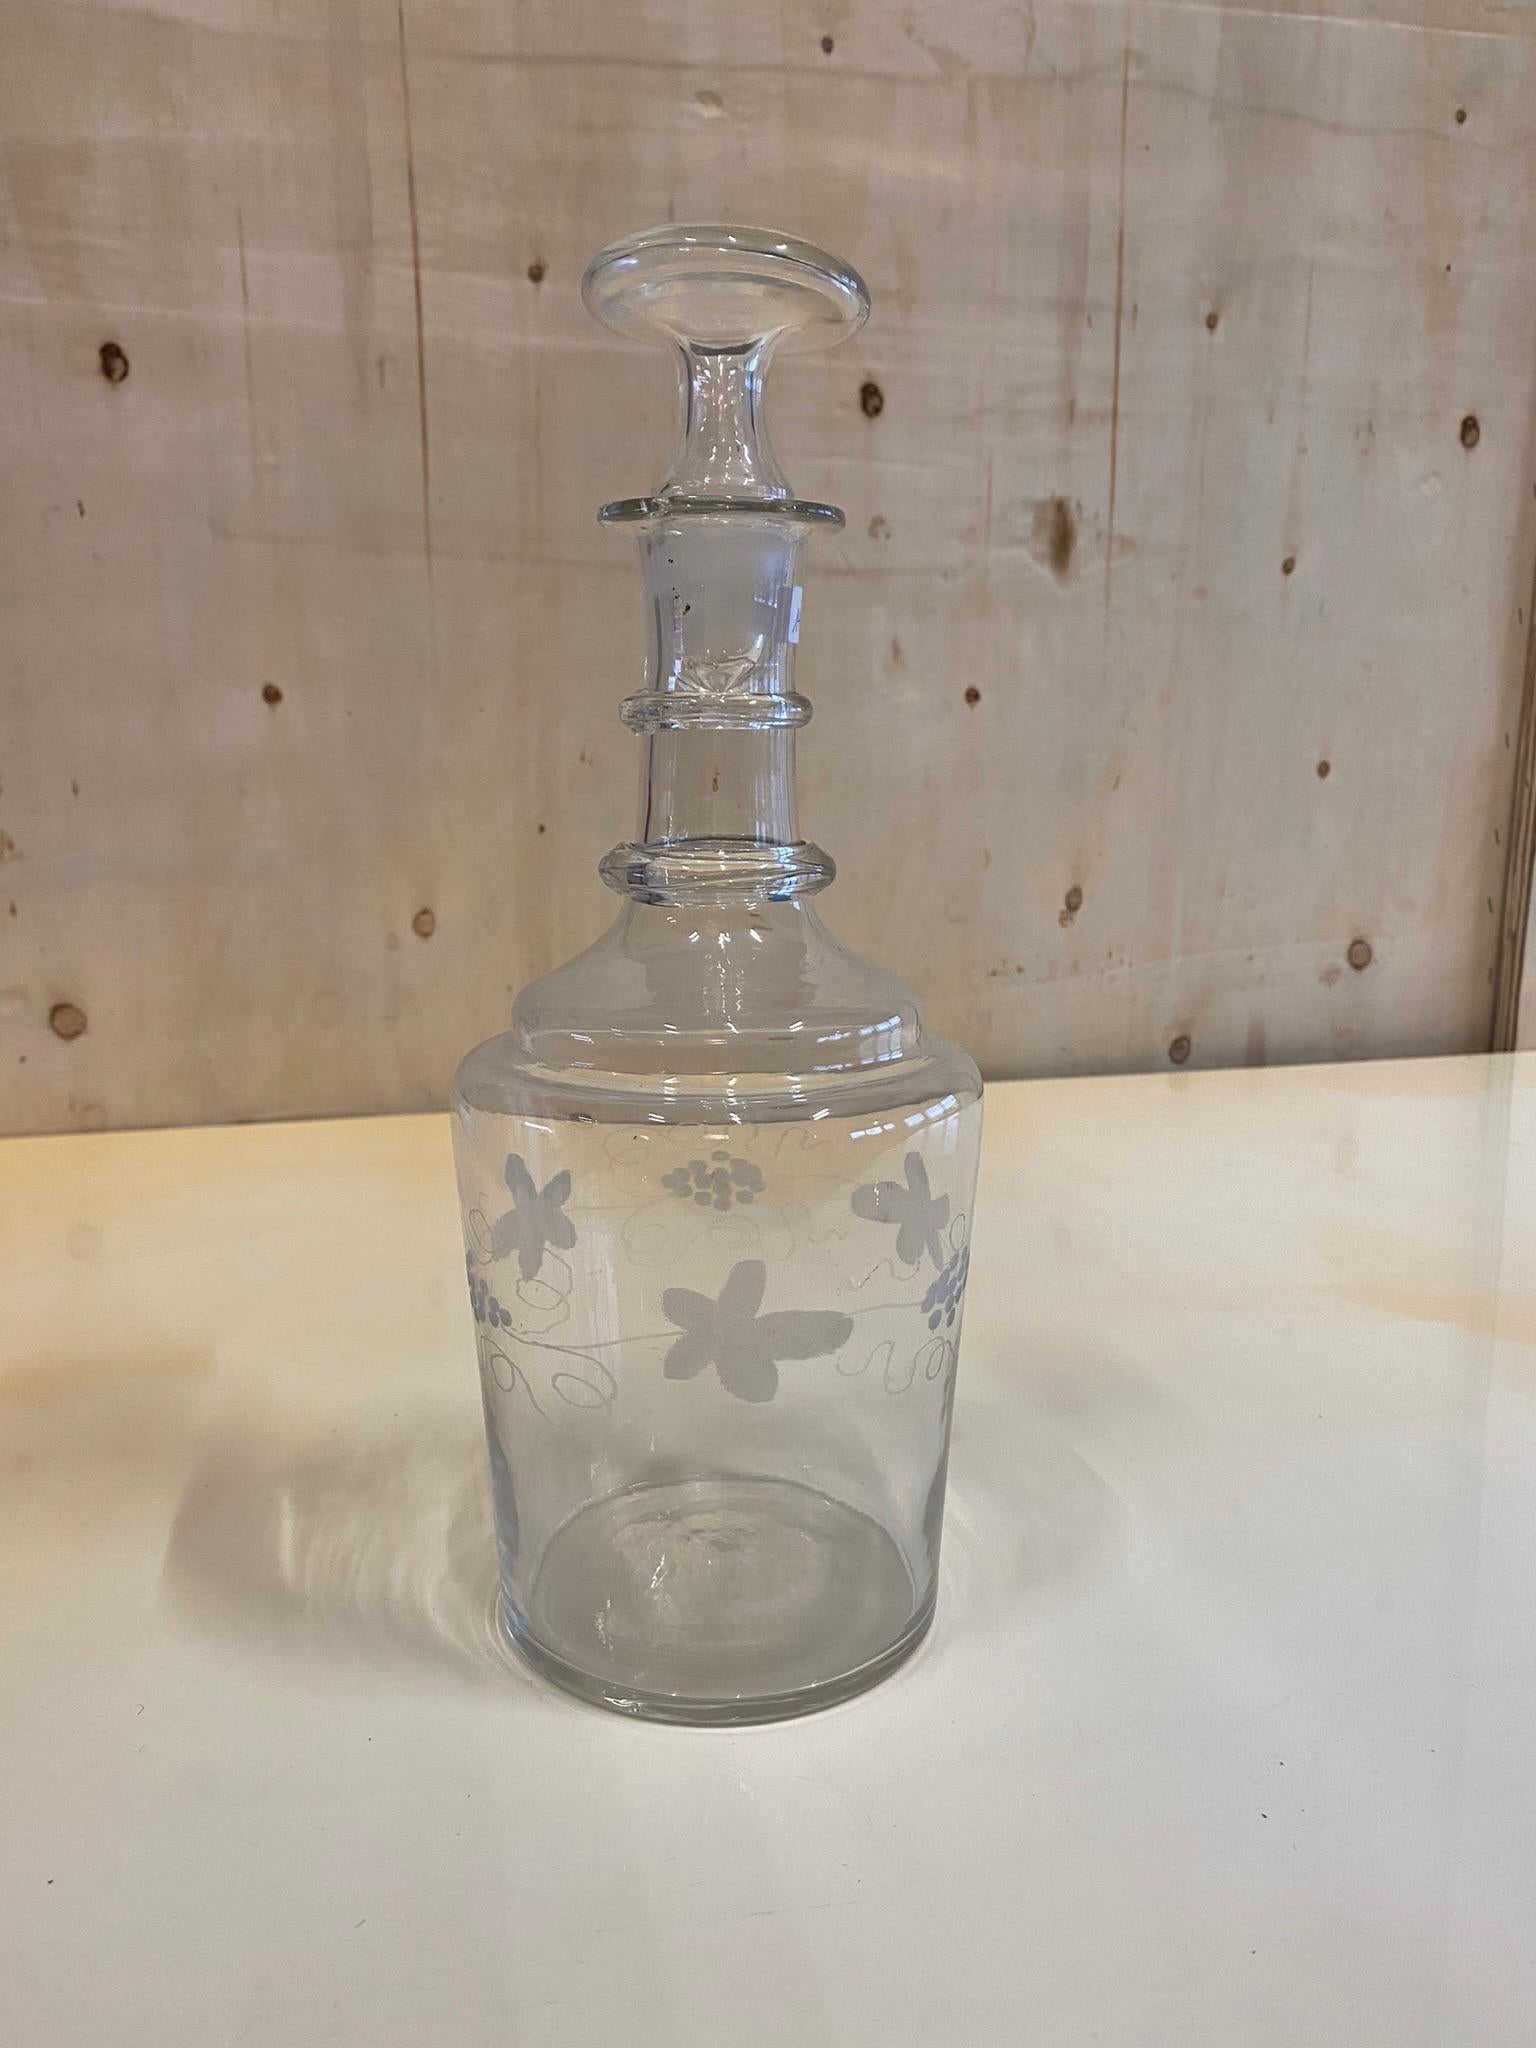 Antique stopper carafe from France from the years around 1900. The carafe has a bulbous body and opens into a narrow neck, which is closed by a stopper. The bulbous part of the carafe is once decorated all around with etched vines and leaves. This